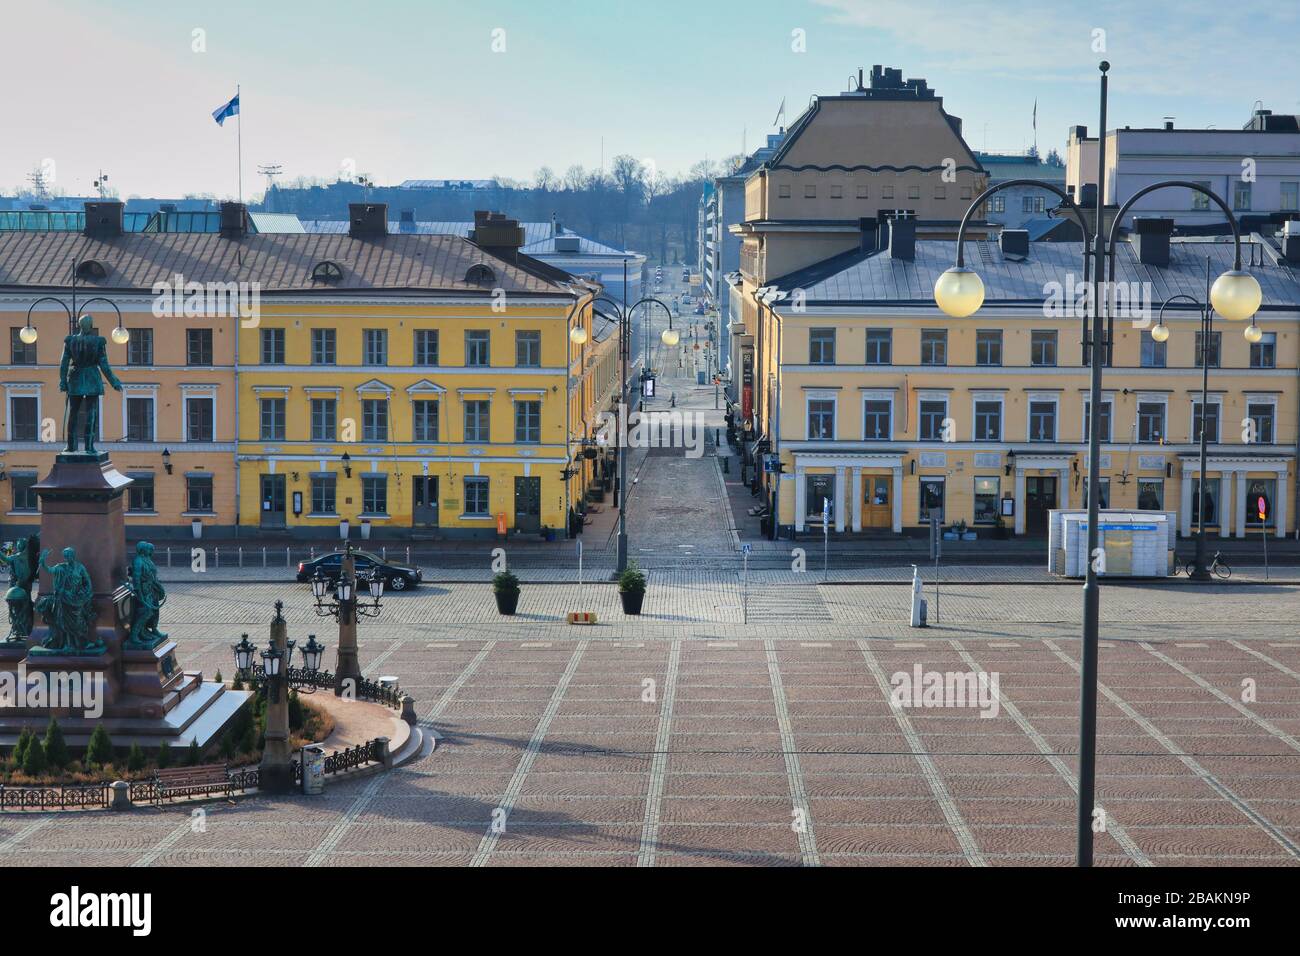 Helsinki, Finland. March 28, 2020. Empty Senate Square during coronavirus pandemic. The square is normally busy with visitors and tourist buses. Stock Photo